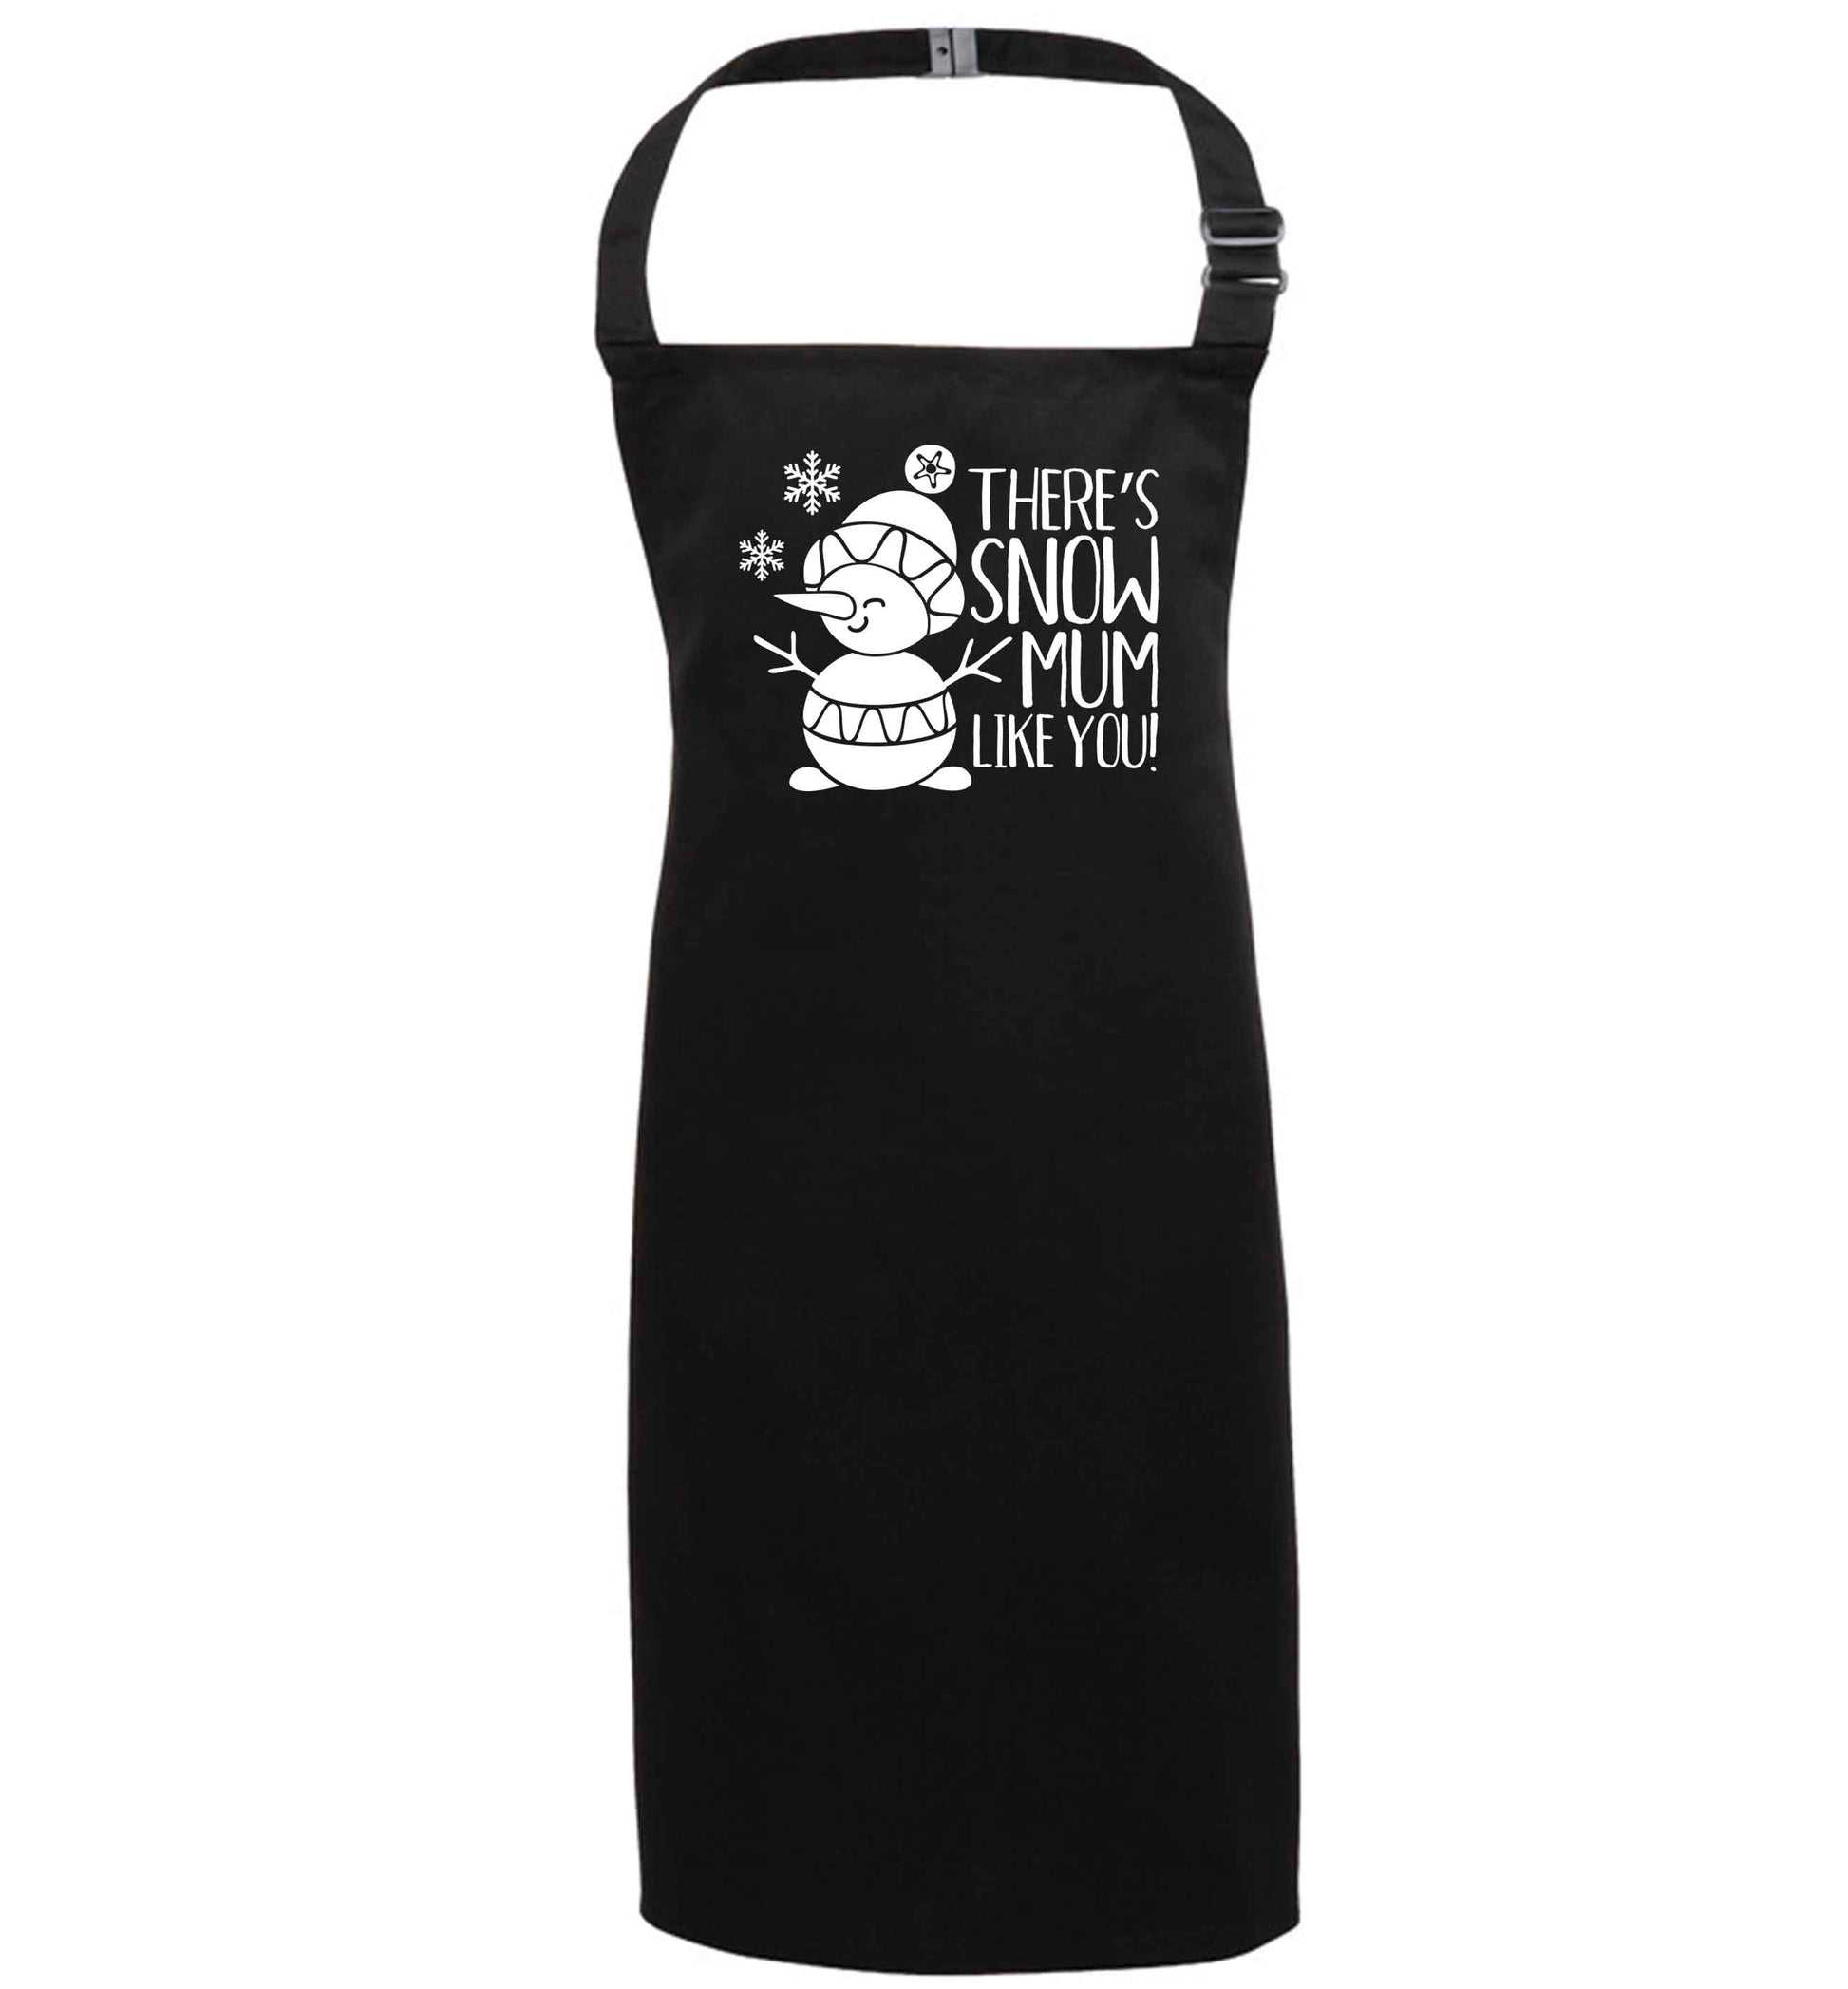 There's snow mum like you black apron 7-10 years